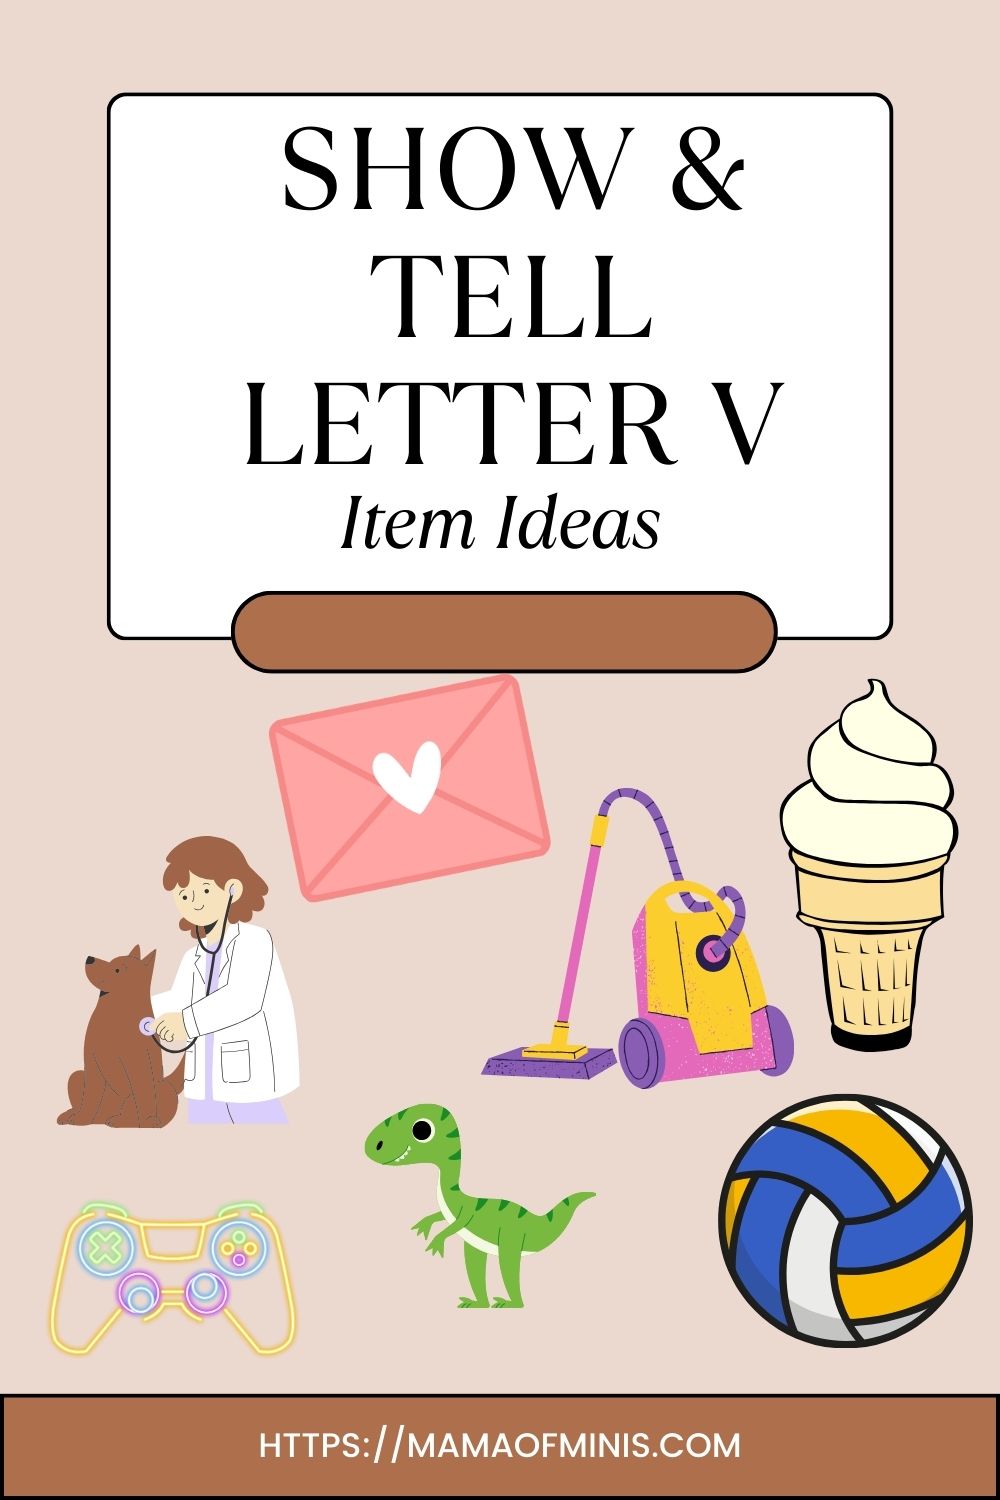 Show and Tell Letter V Item Ideas Pin